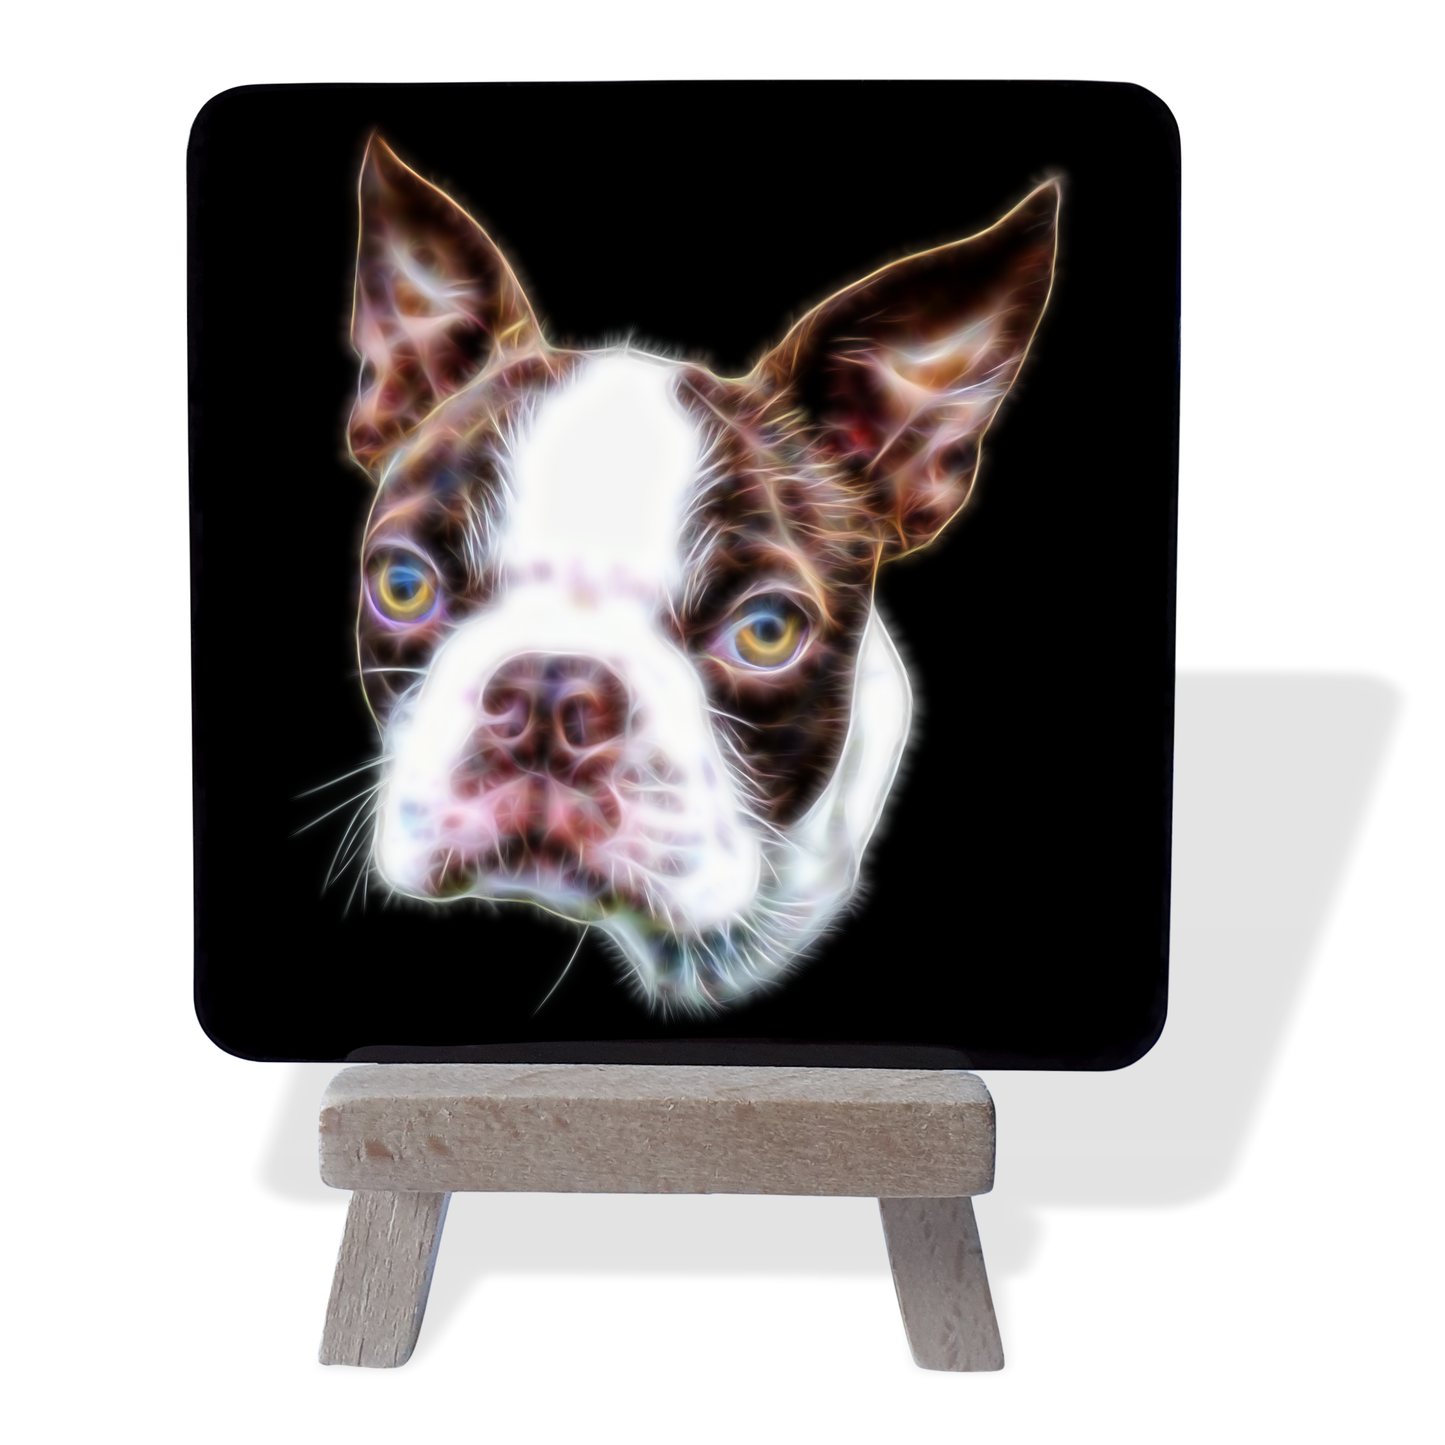 Boston Terrier - Brown and White Boston Terrier Metal Plaque and Mini Easel with Fractal Art Design